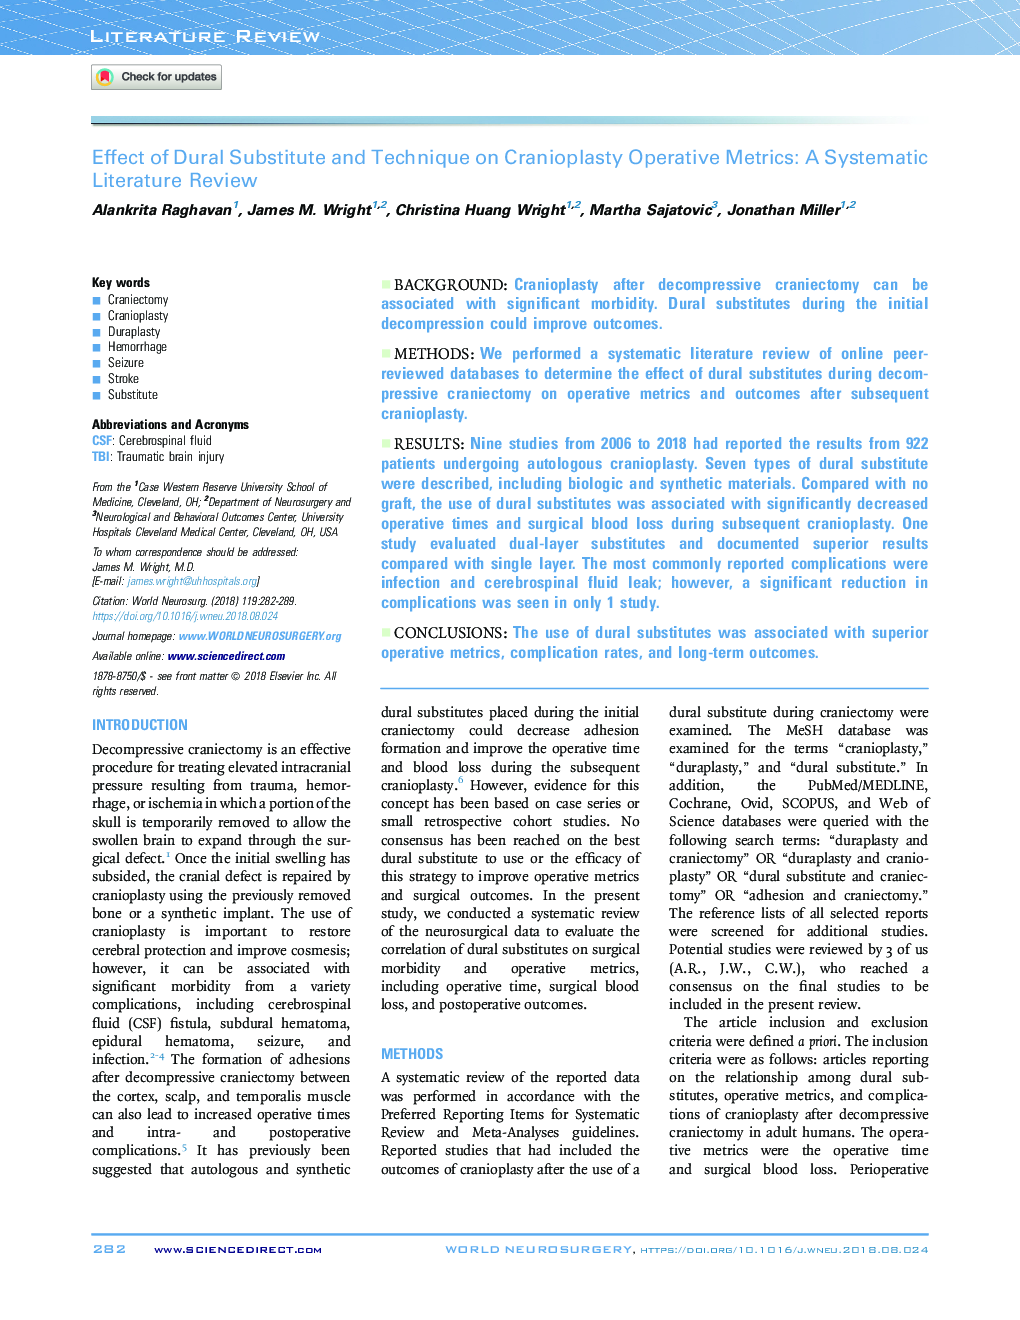 Effect of Dural Substitute and Technique on Cranioplasty Operative Metrics: A Systematic Literature Review